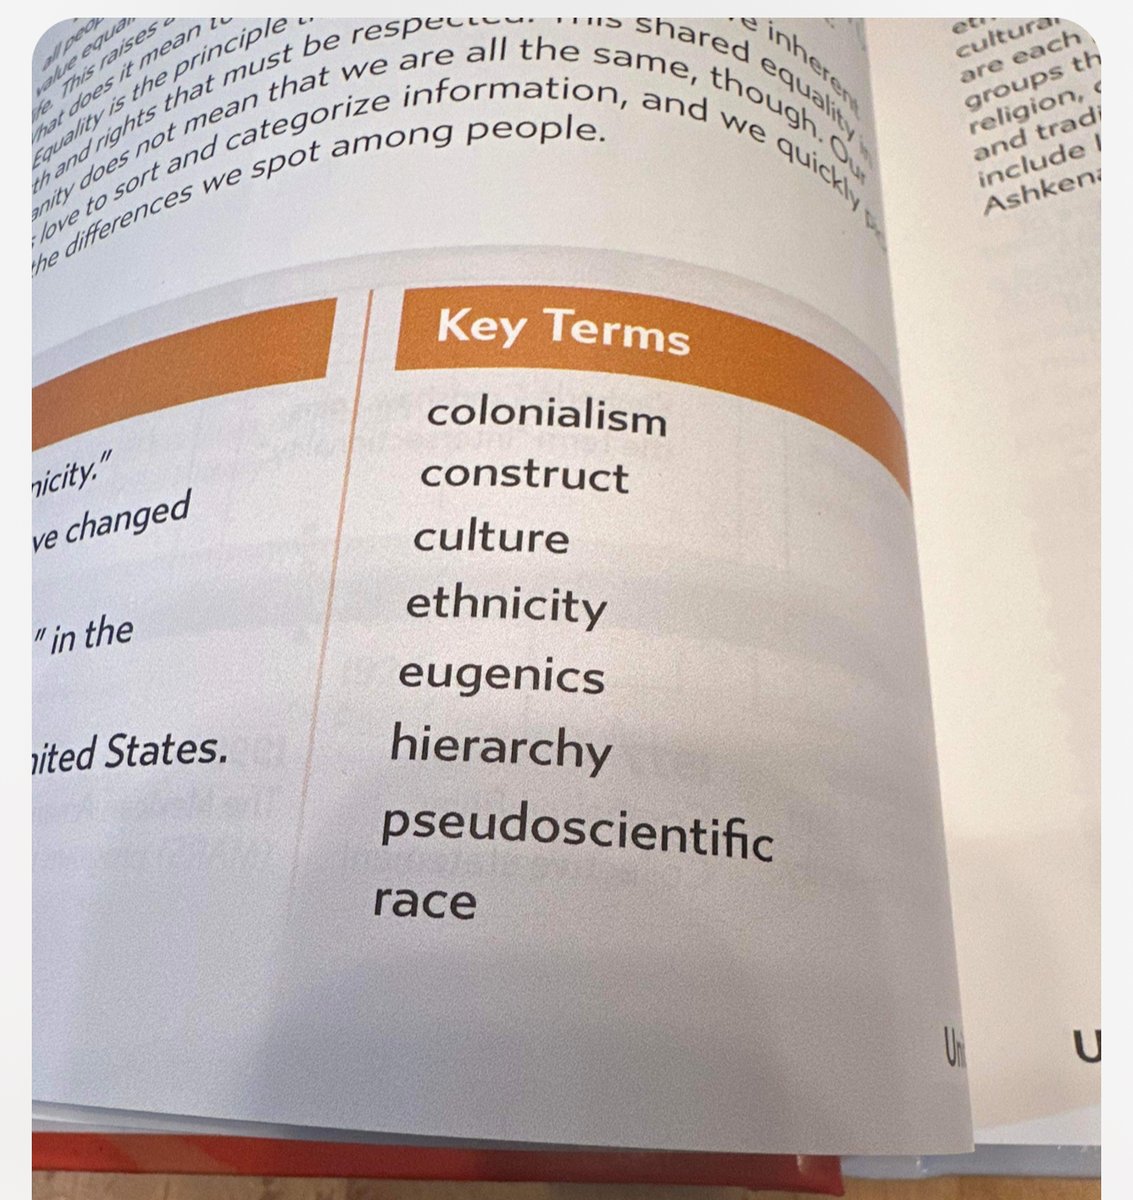 🧵If you are wondering how children and teens are weaponized while at school. Look closely at their Ethnic Studies course. Here are a few examples from a public school Ethnic Studies course. Ethnic Studies is supposed to teach children about different cultures, it is intended to…